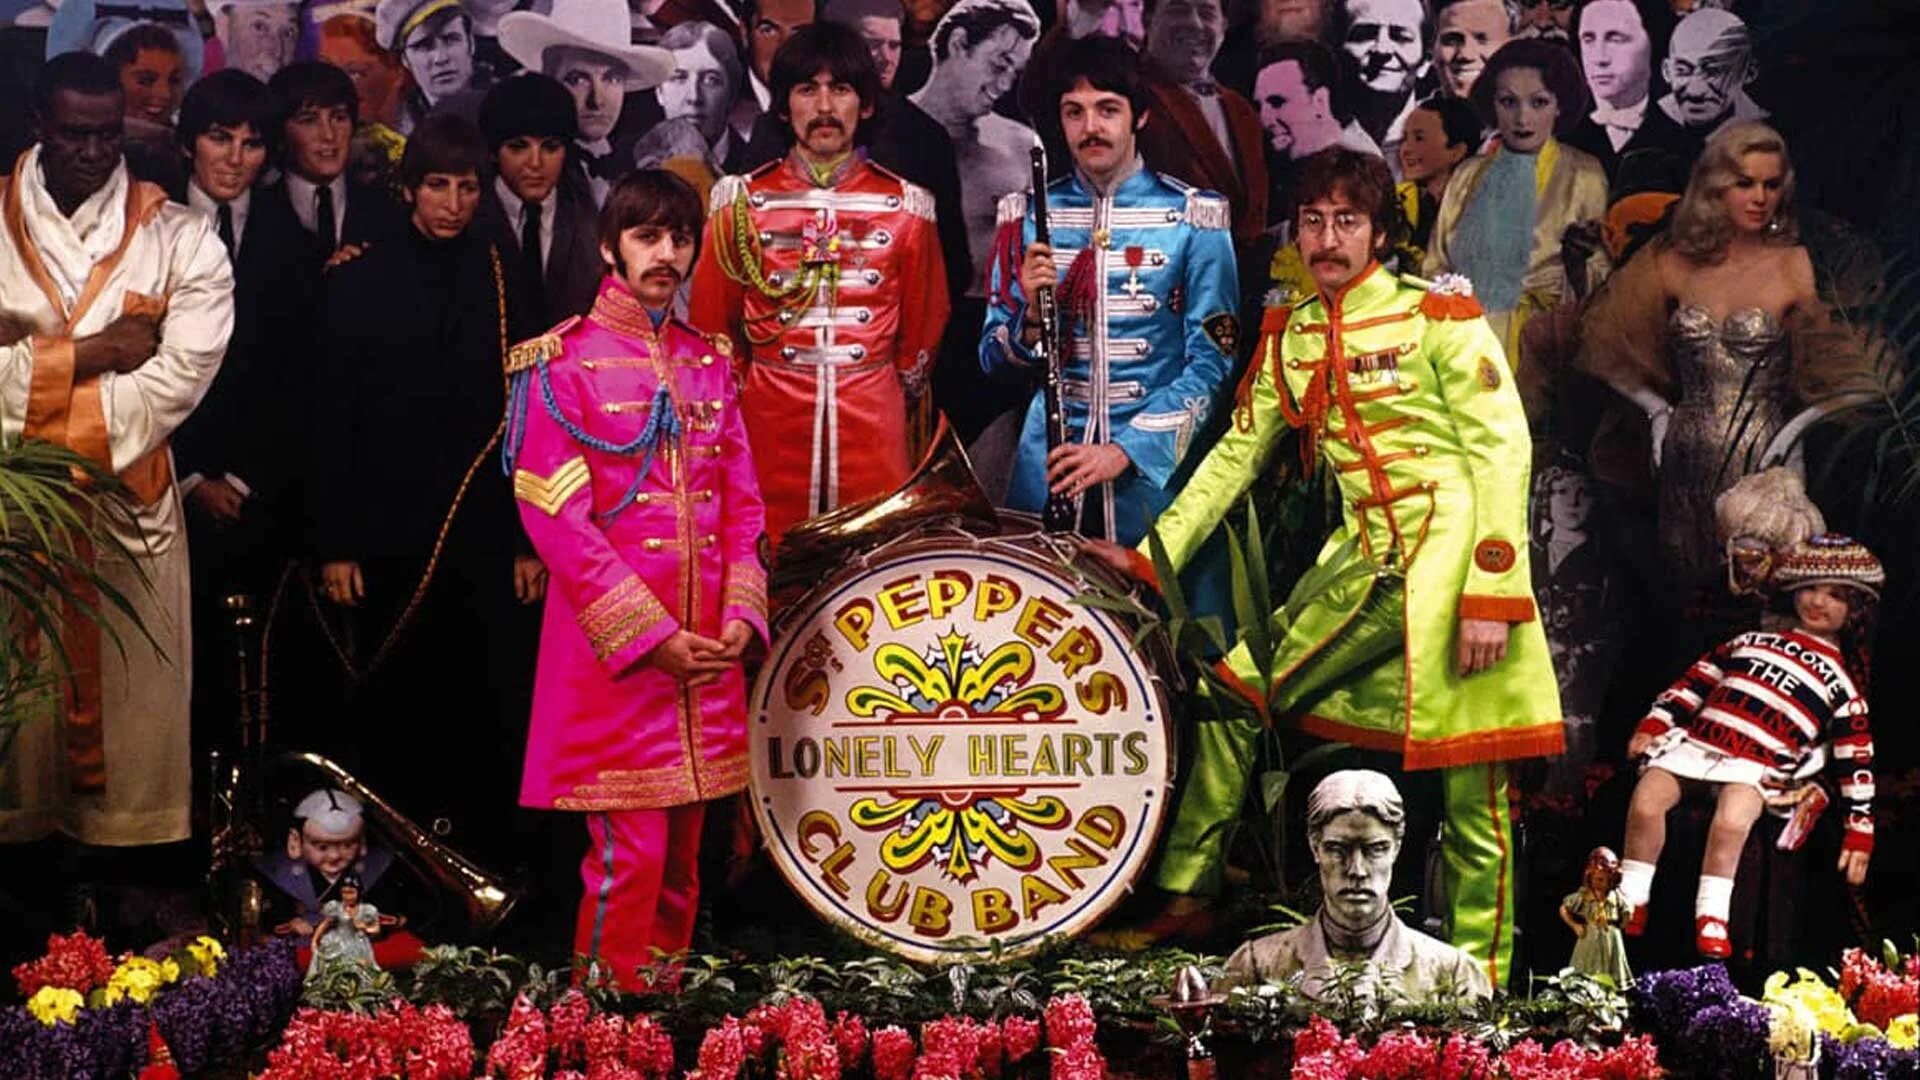 Beatles sgt peppers lonely hearts club. Битлз сержант Пеппер. The Beatles Sgt. Pepper's Lonely Hearts Club Band 1967. Обложка Битлз сержант Пеппер. The Beatles Sgt. Pepper's Lonely Hearts Club Band обложка.